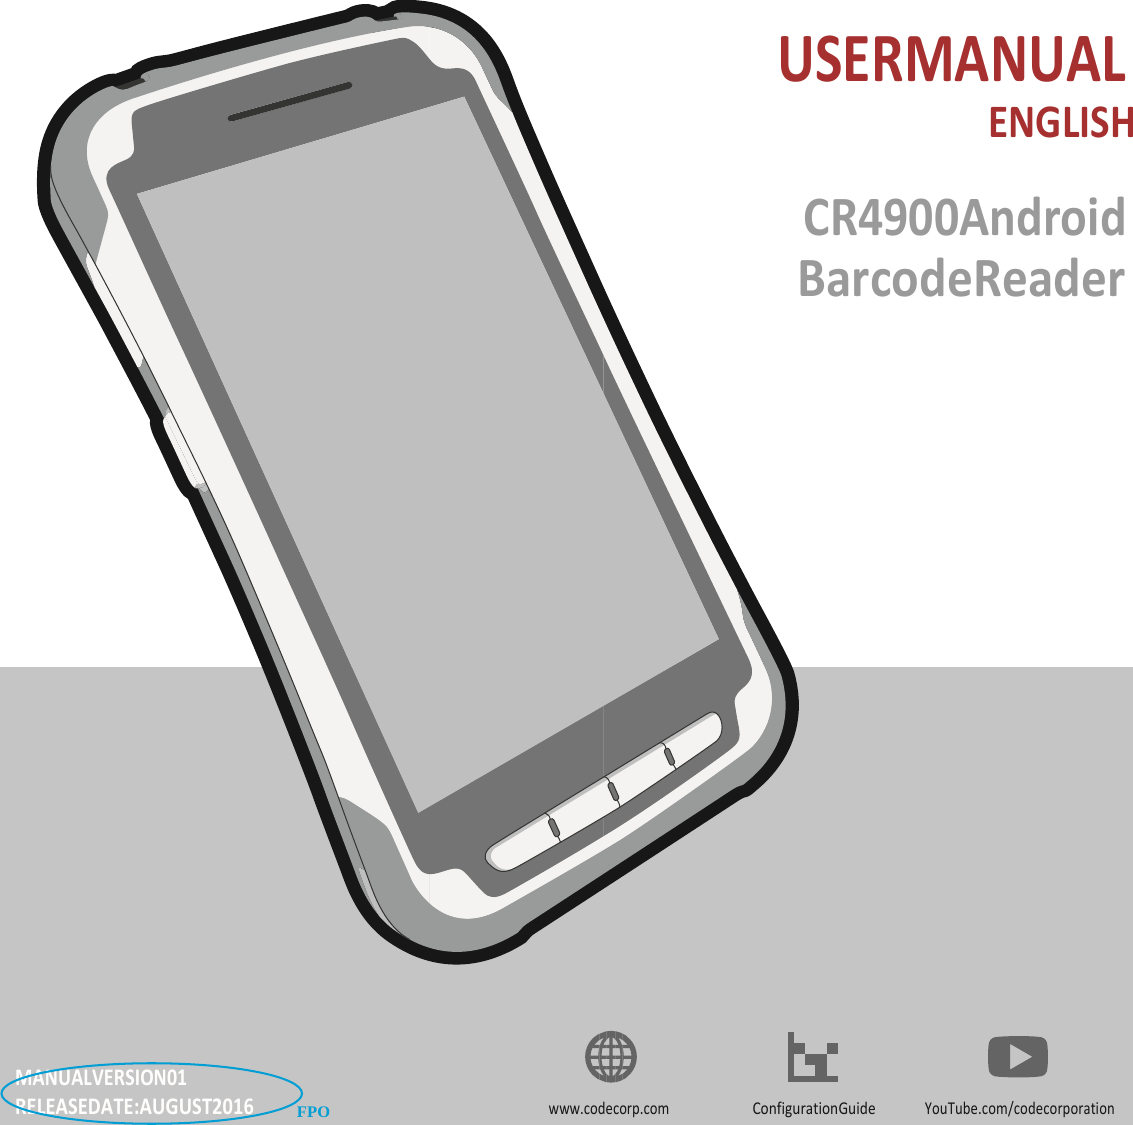 CR4900AndroidBarcodeReaderUSERMANUALENGLISHConfigurationGuidewww.codecorp.comYouTube.com/codecorporationMANUALVERSION01RELEASEDATE:AUGUST2016FPO